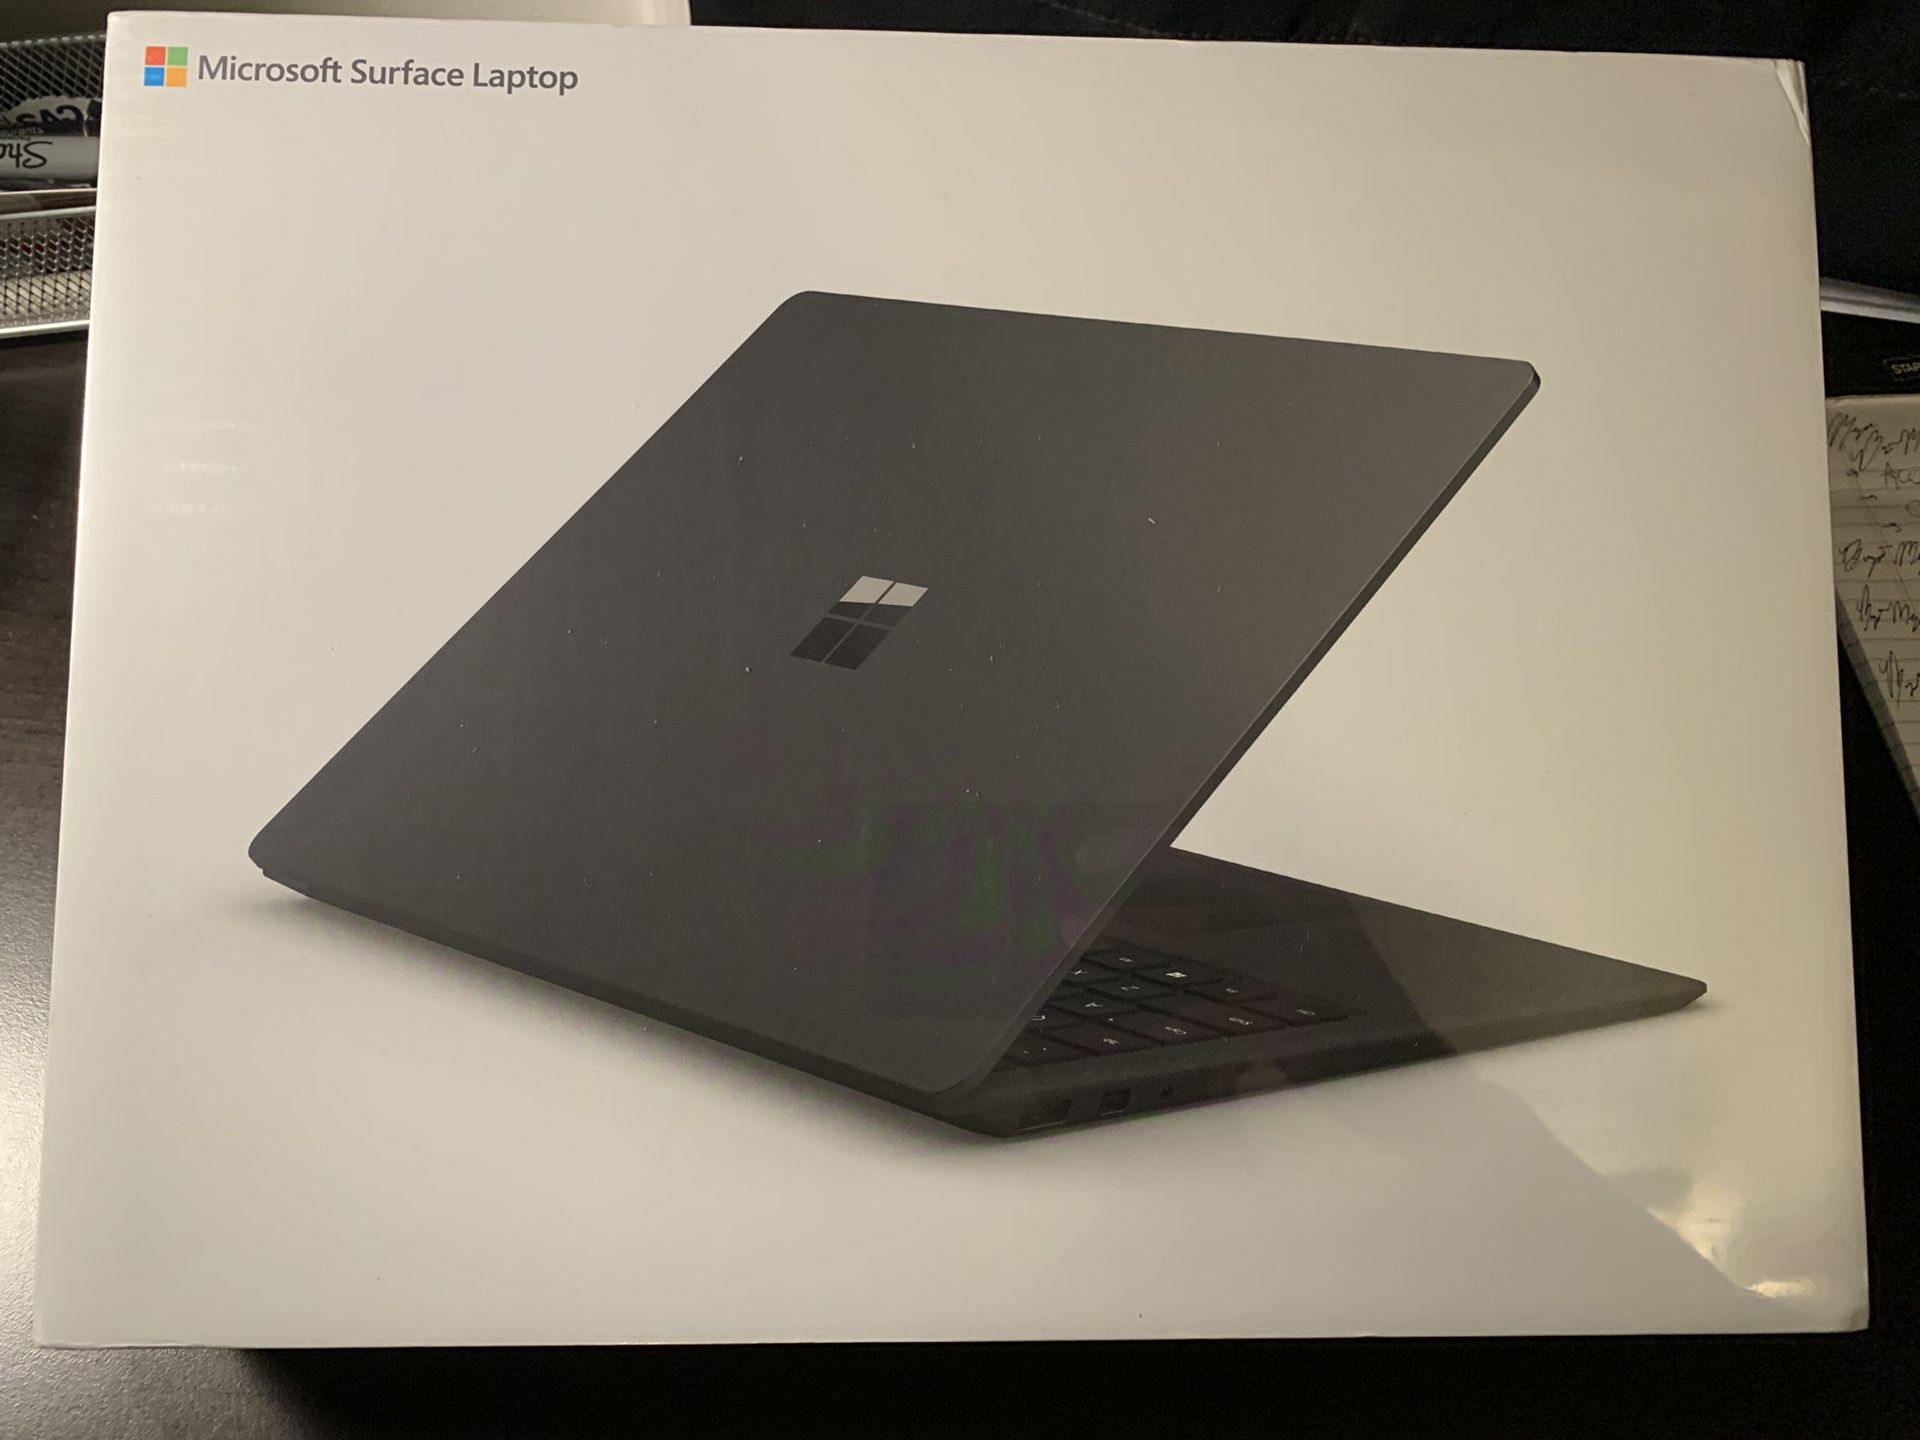 BRAND NEW- Microsoft - Surface Laptop 2 - 13.5" Touch-Screen - Intel Core i7 - 8GB Memory - 256GB Solid State Drive (Latest Model) - Black